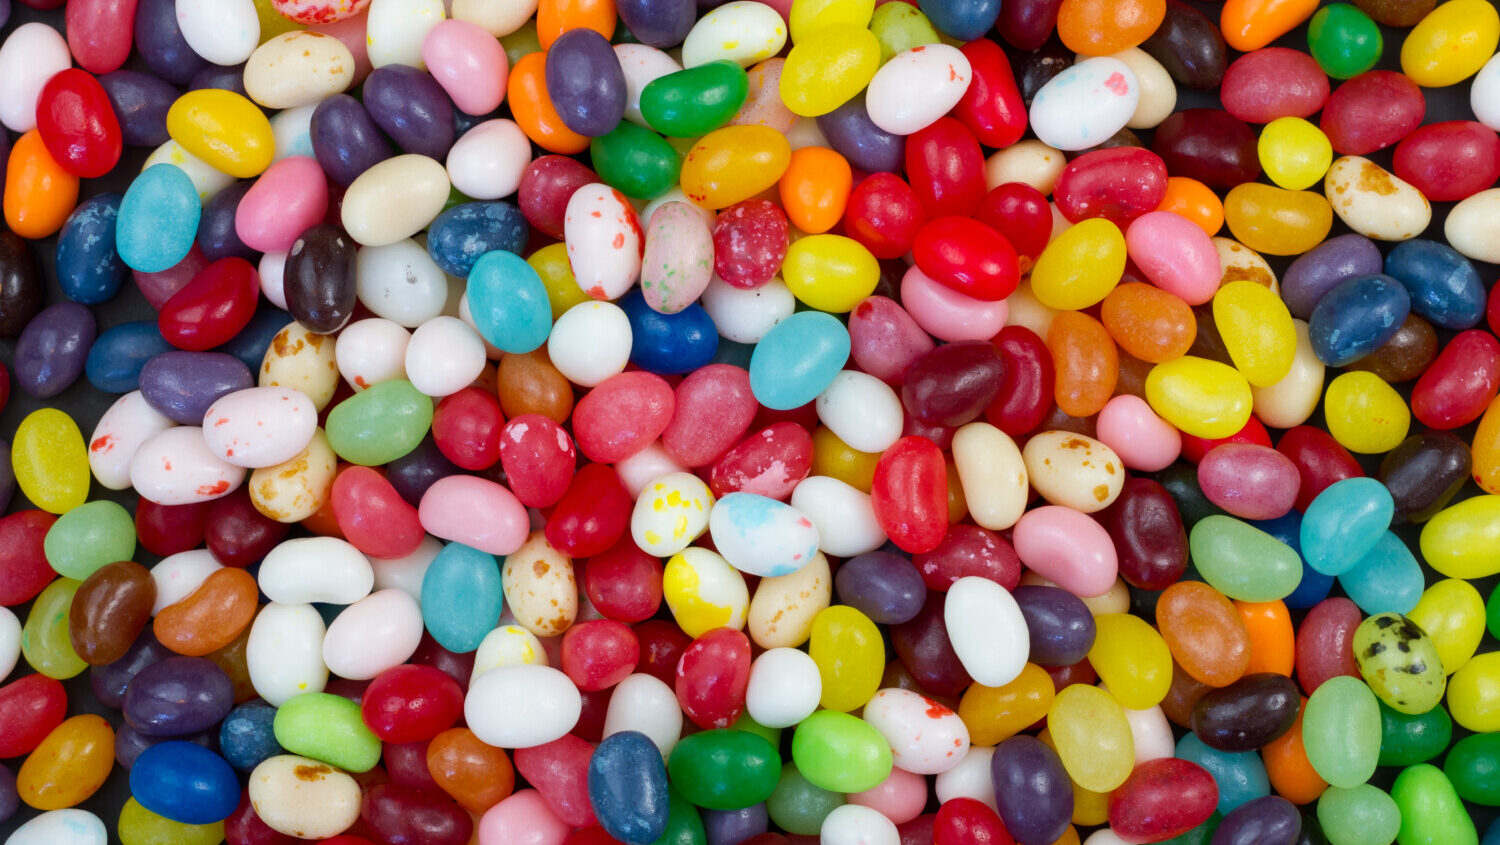 Jelly beans in many colors